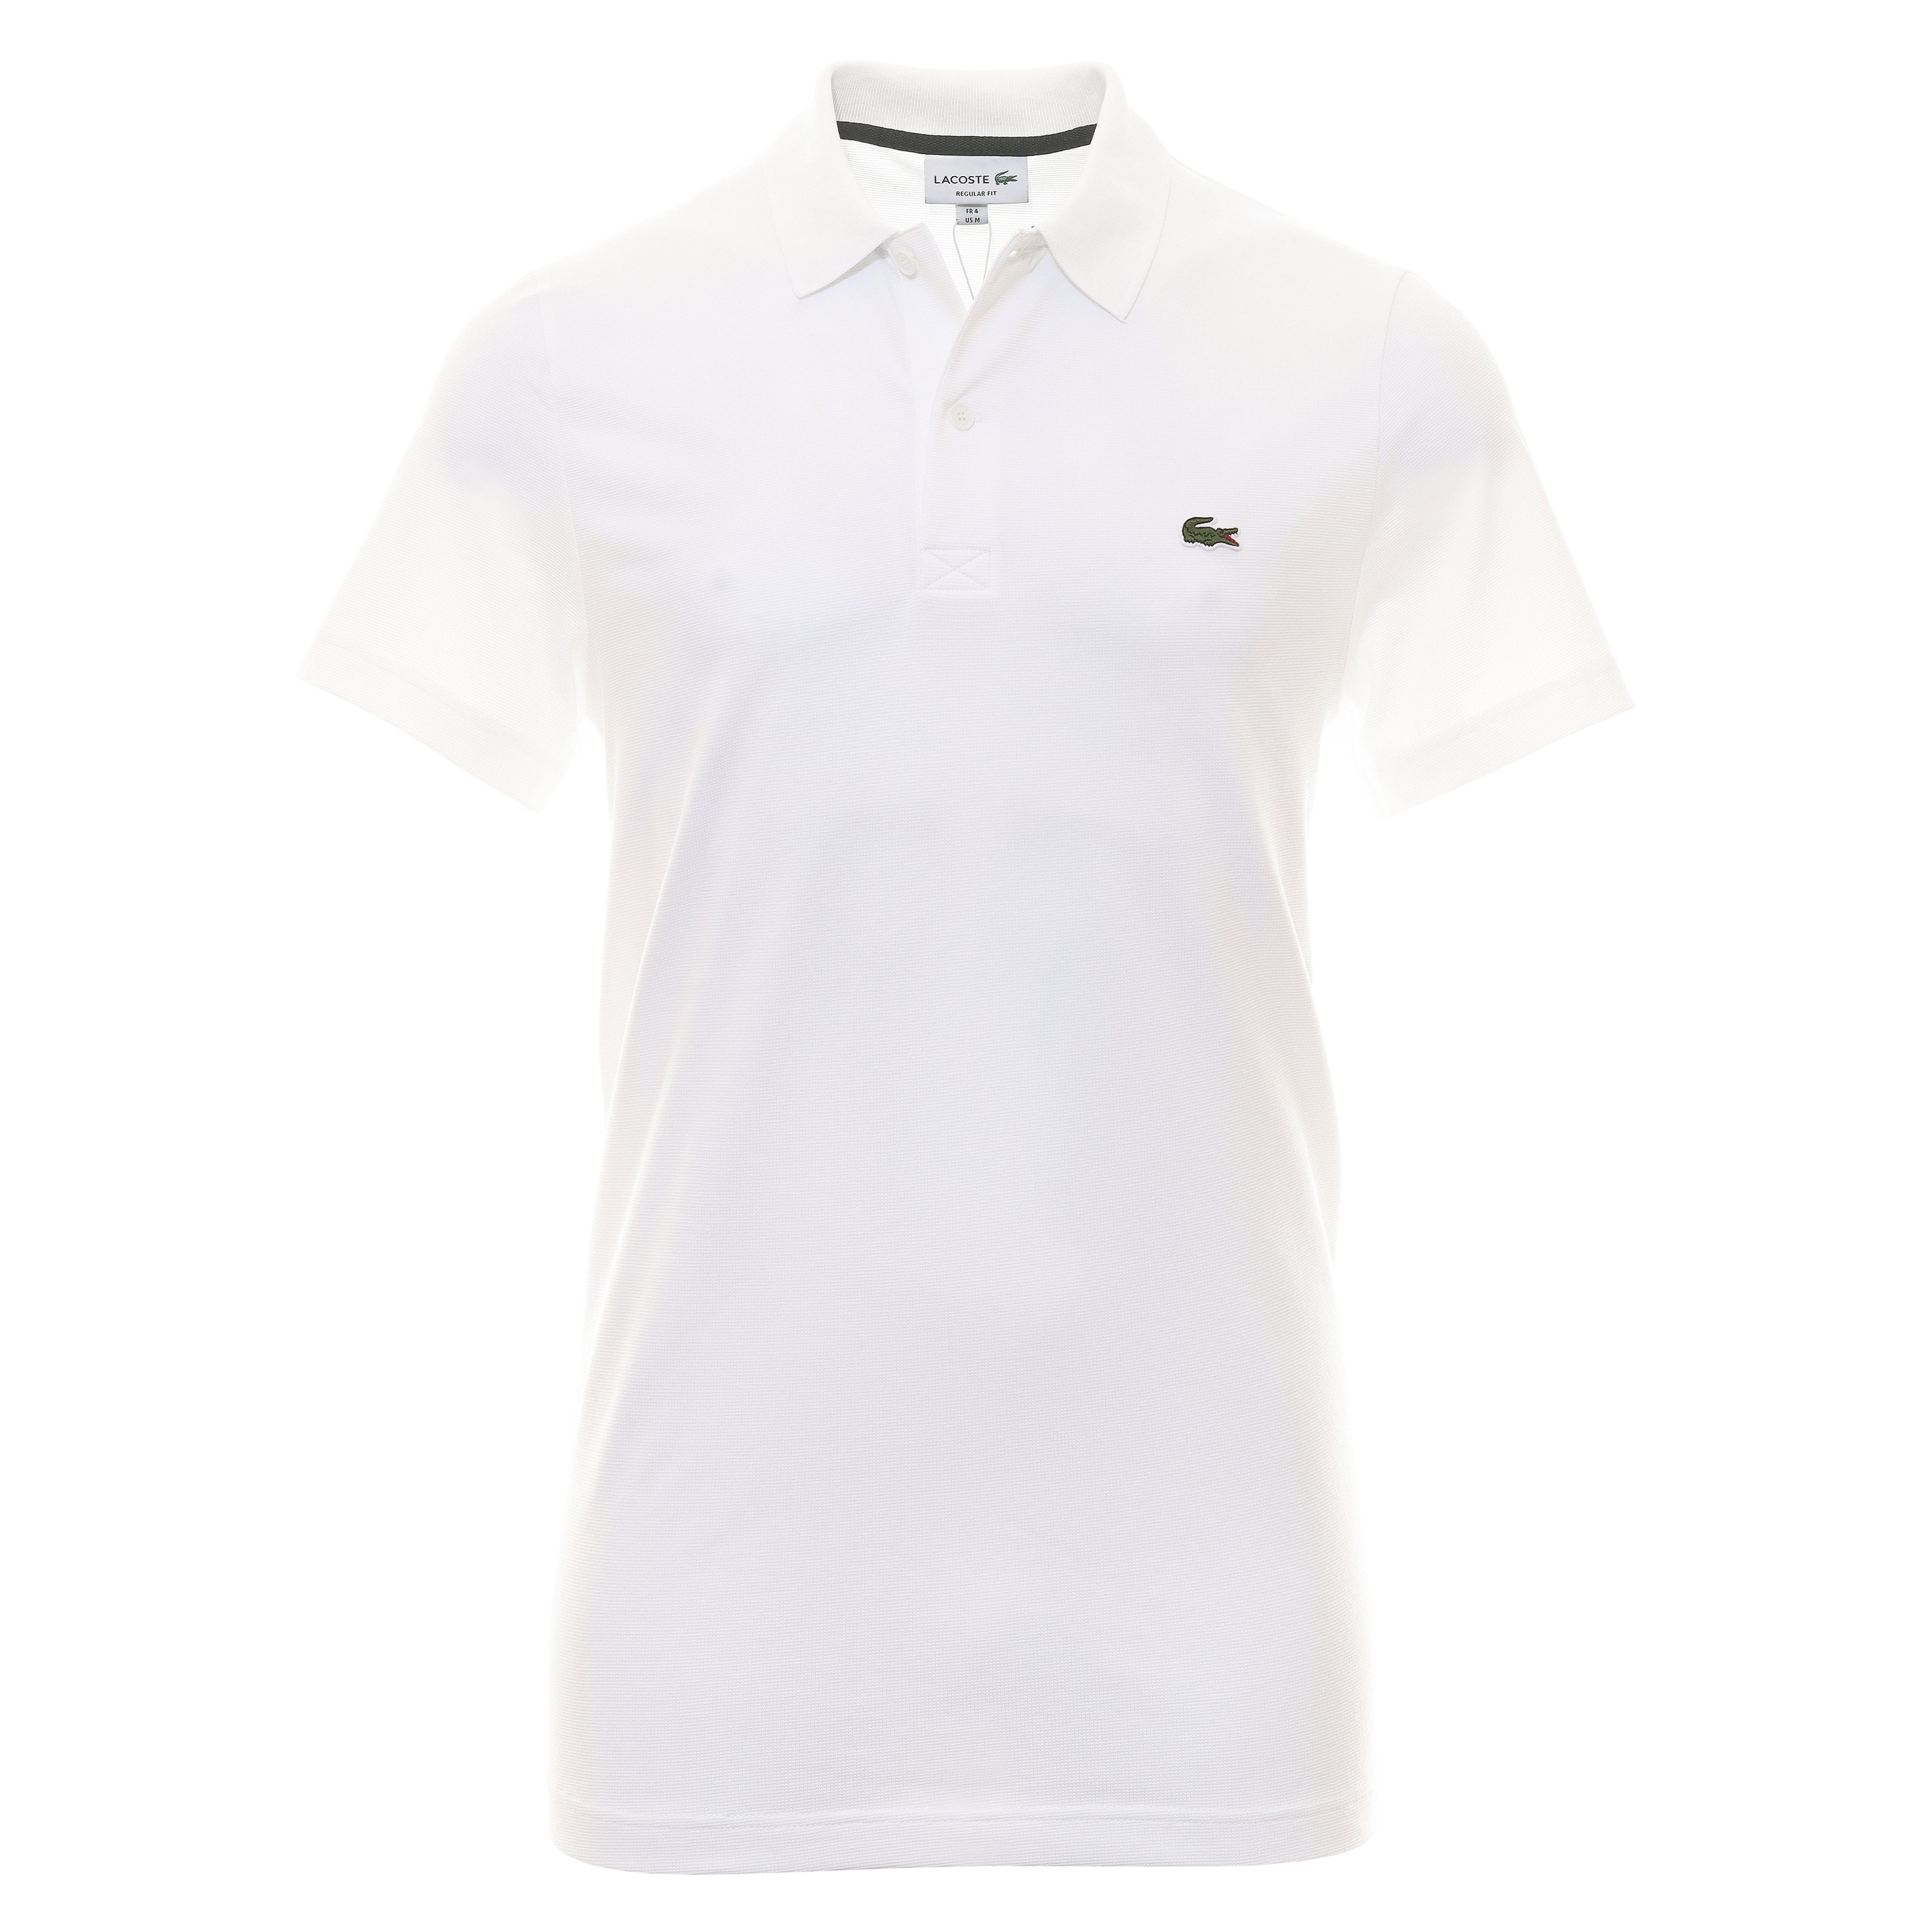 Lacoste Organic Cotton Stretch Polo Shirt DH0783 White 001 | Function18